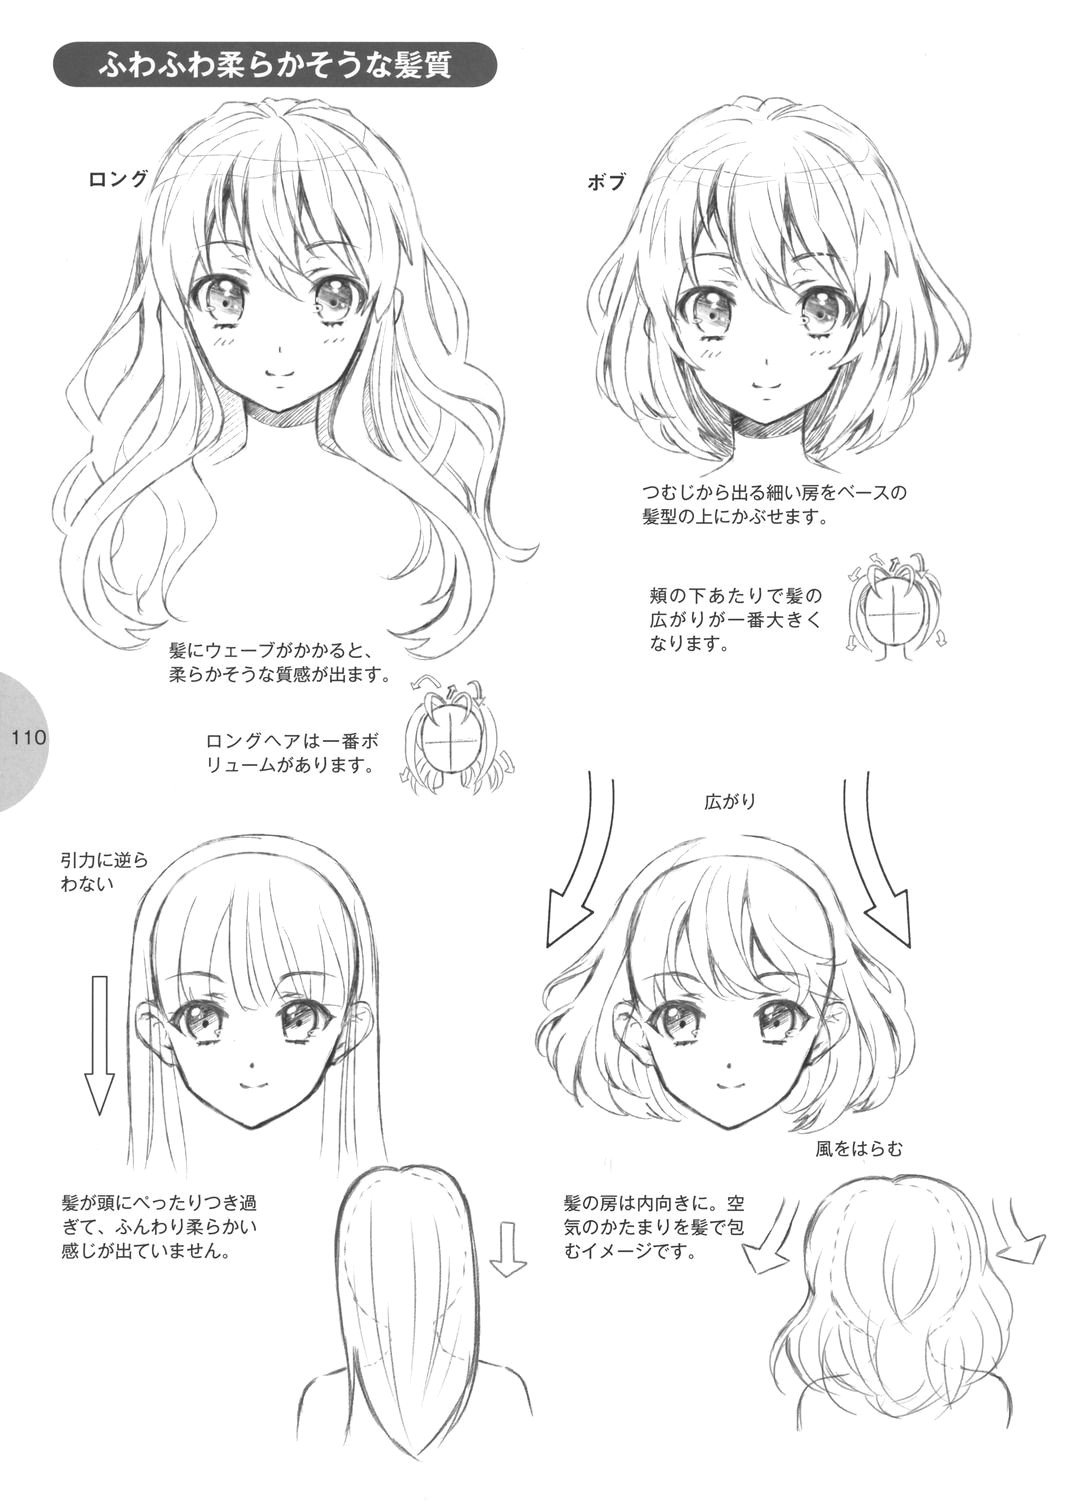 Drawing Anime In Paint Tutorial Hair Paint Pinterest Drawings Anime Hair and Manga